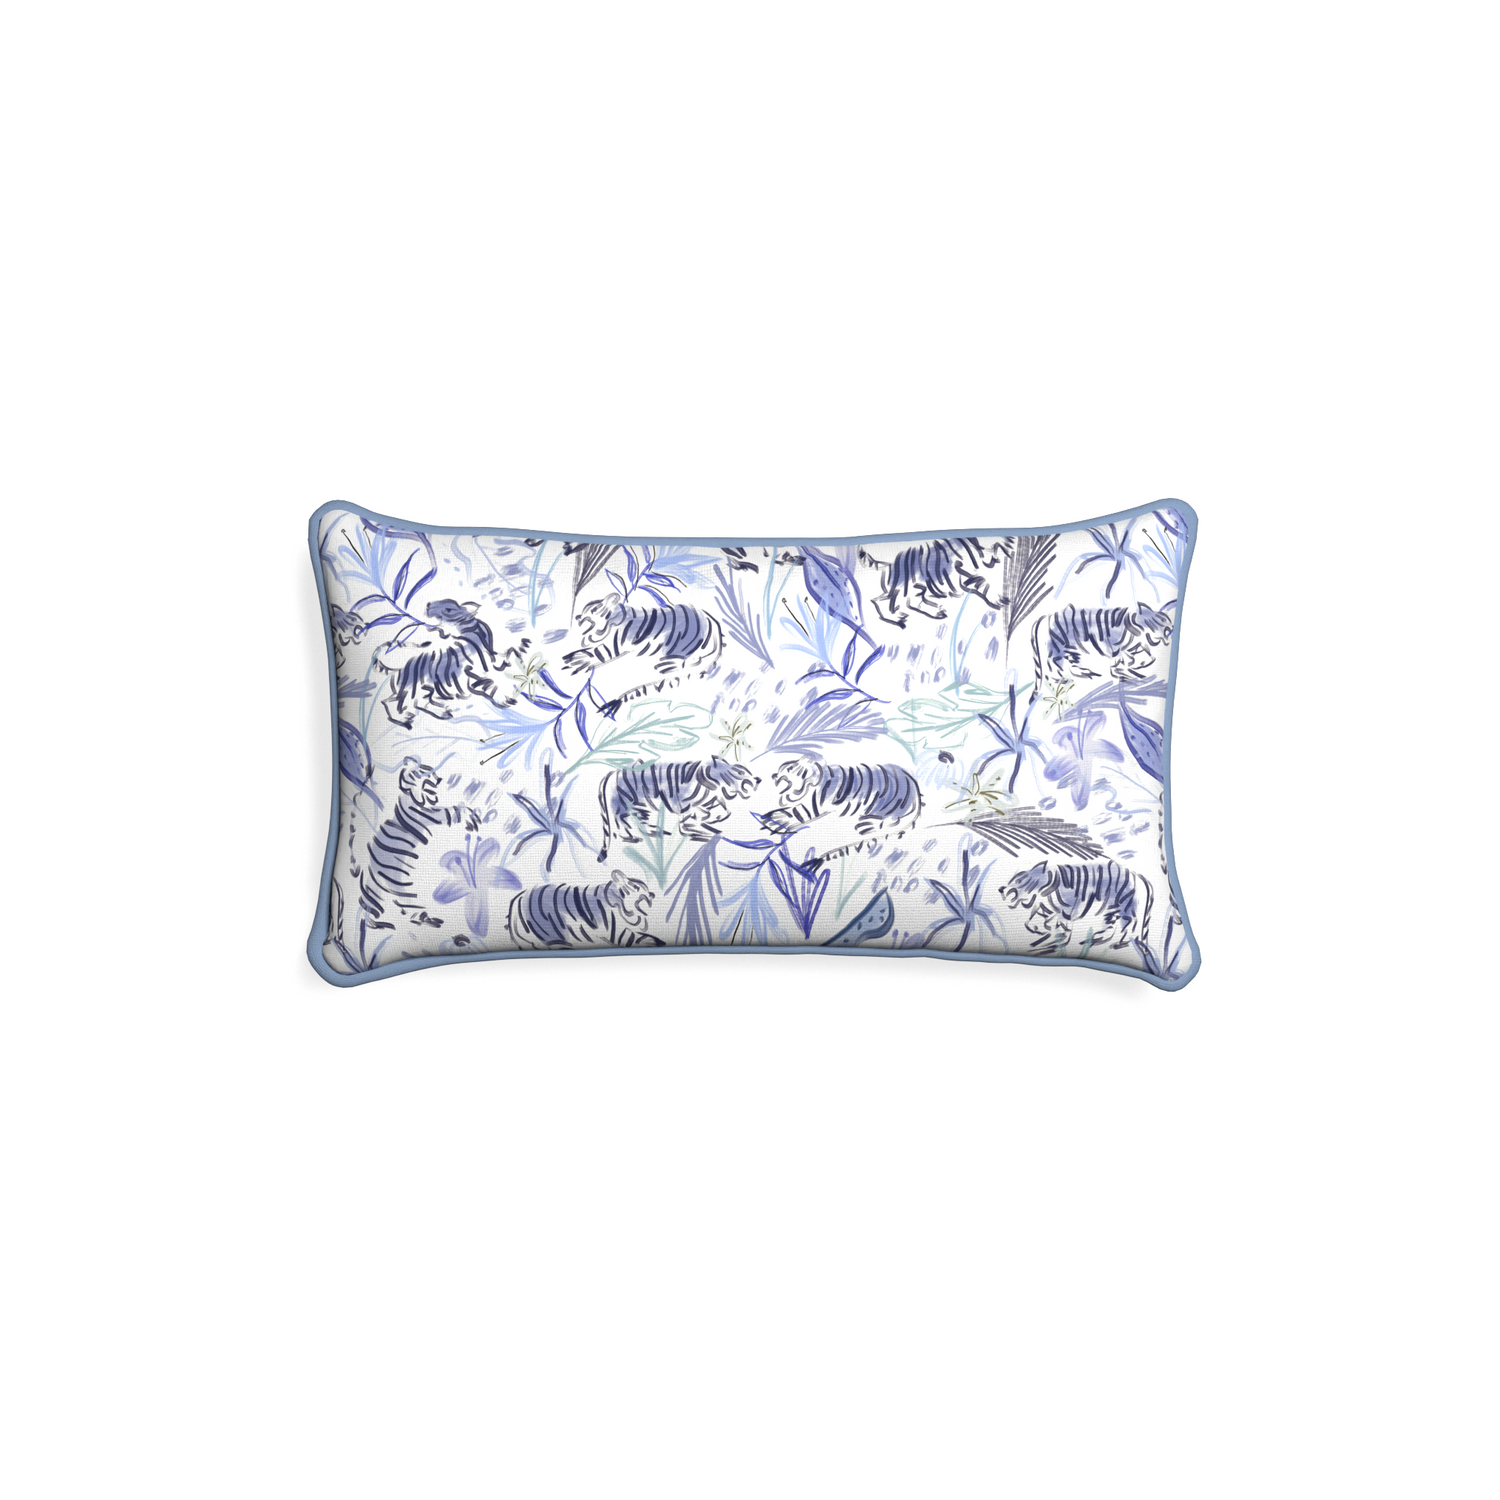 Petite-lumbar frida blue custom blue with intricate tiger designpillow with sky piping on white background